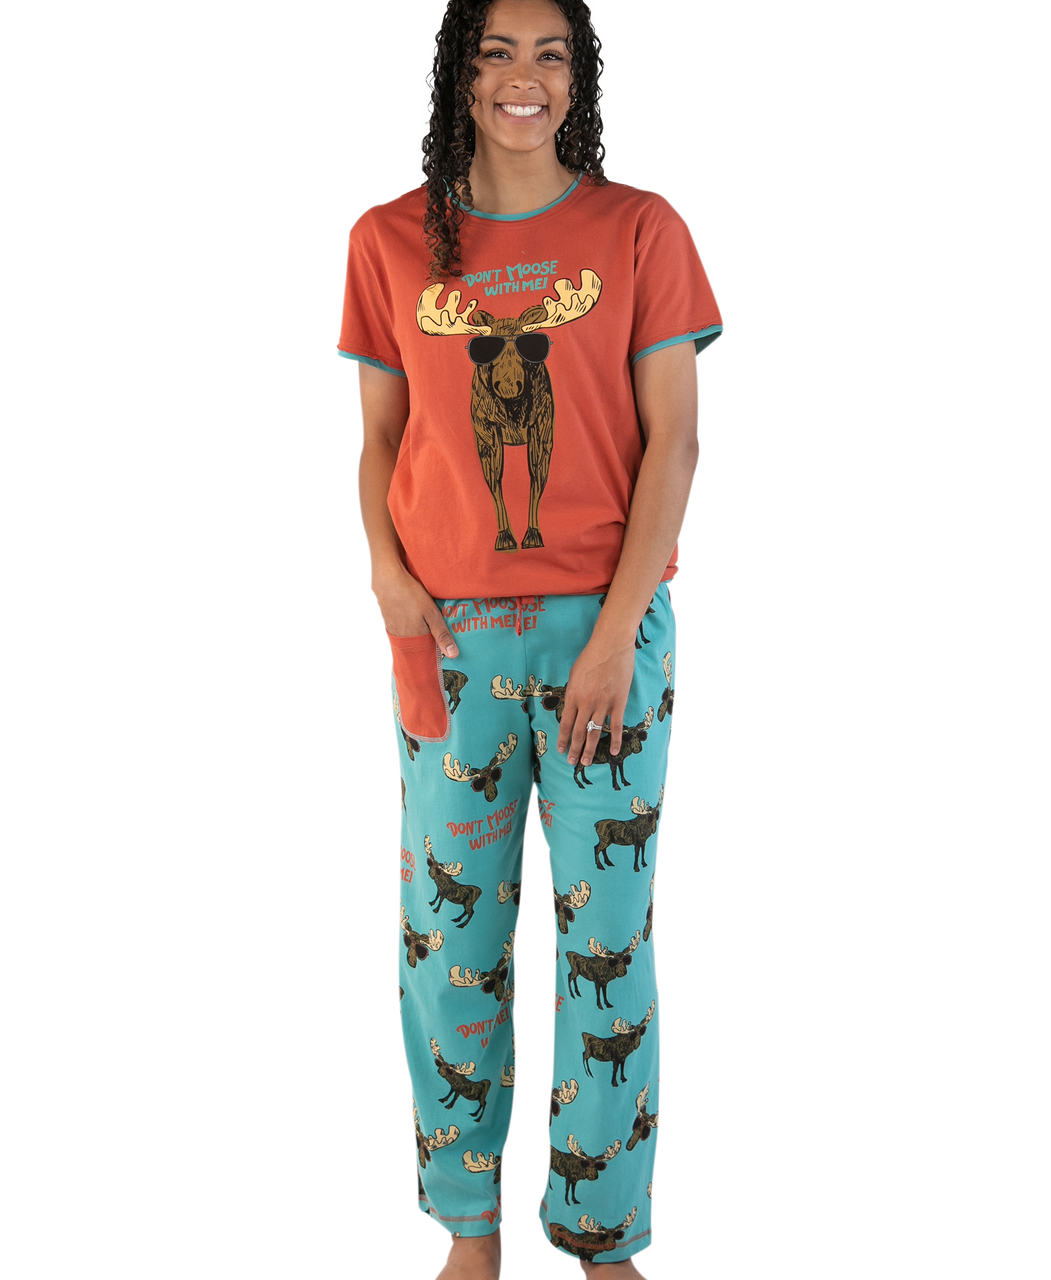 Lazy One Pajama Moose Adult Blue Flapjack PJ's Don't Moose with Me Choose  Size